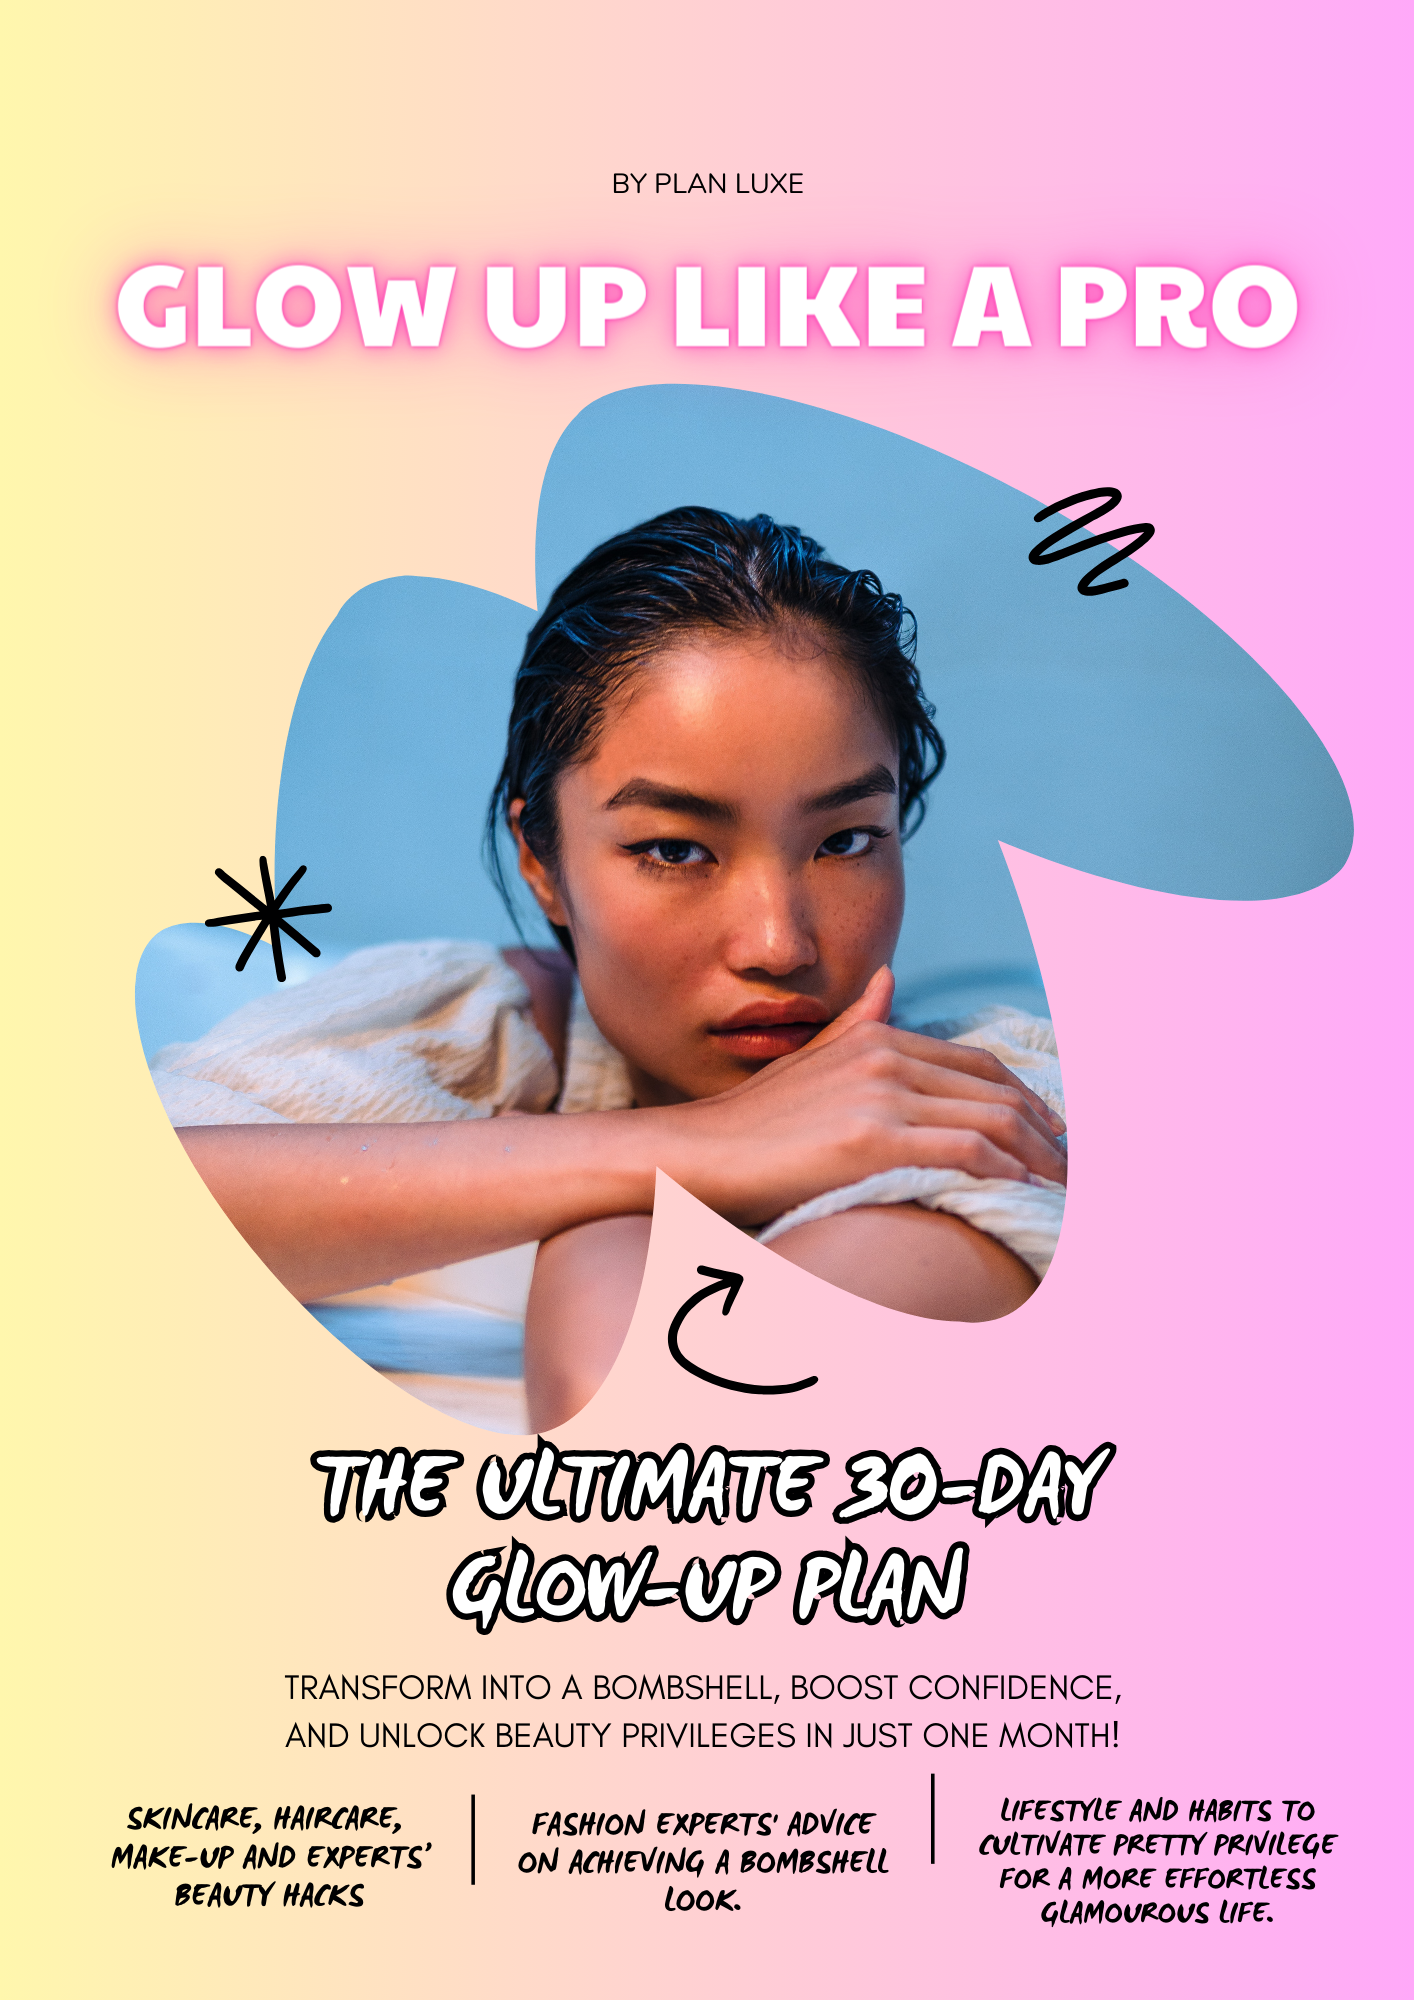 GLOW UP LIKE A PRO: The Ultimate 30-day Glow up Plan